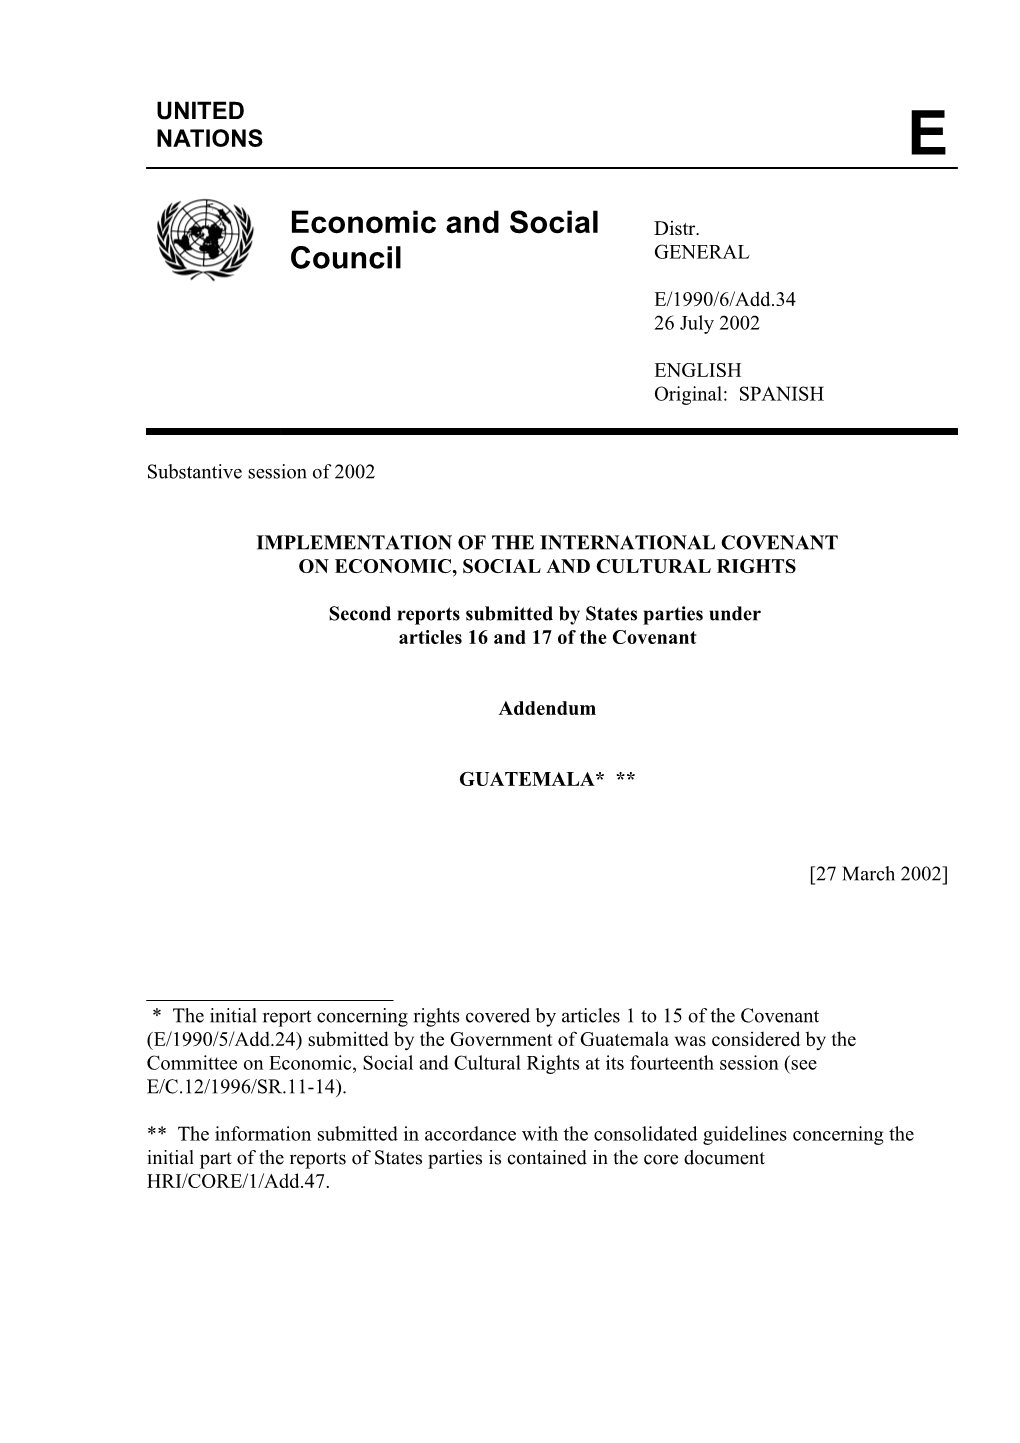 Implementation of the International Covenant